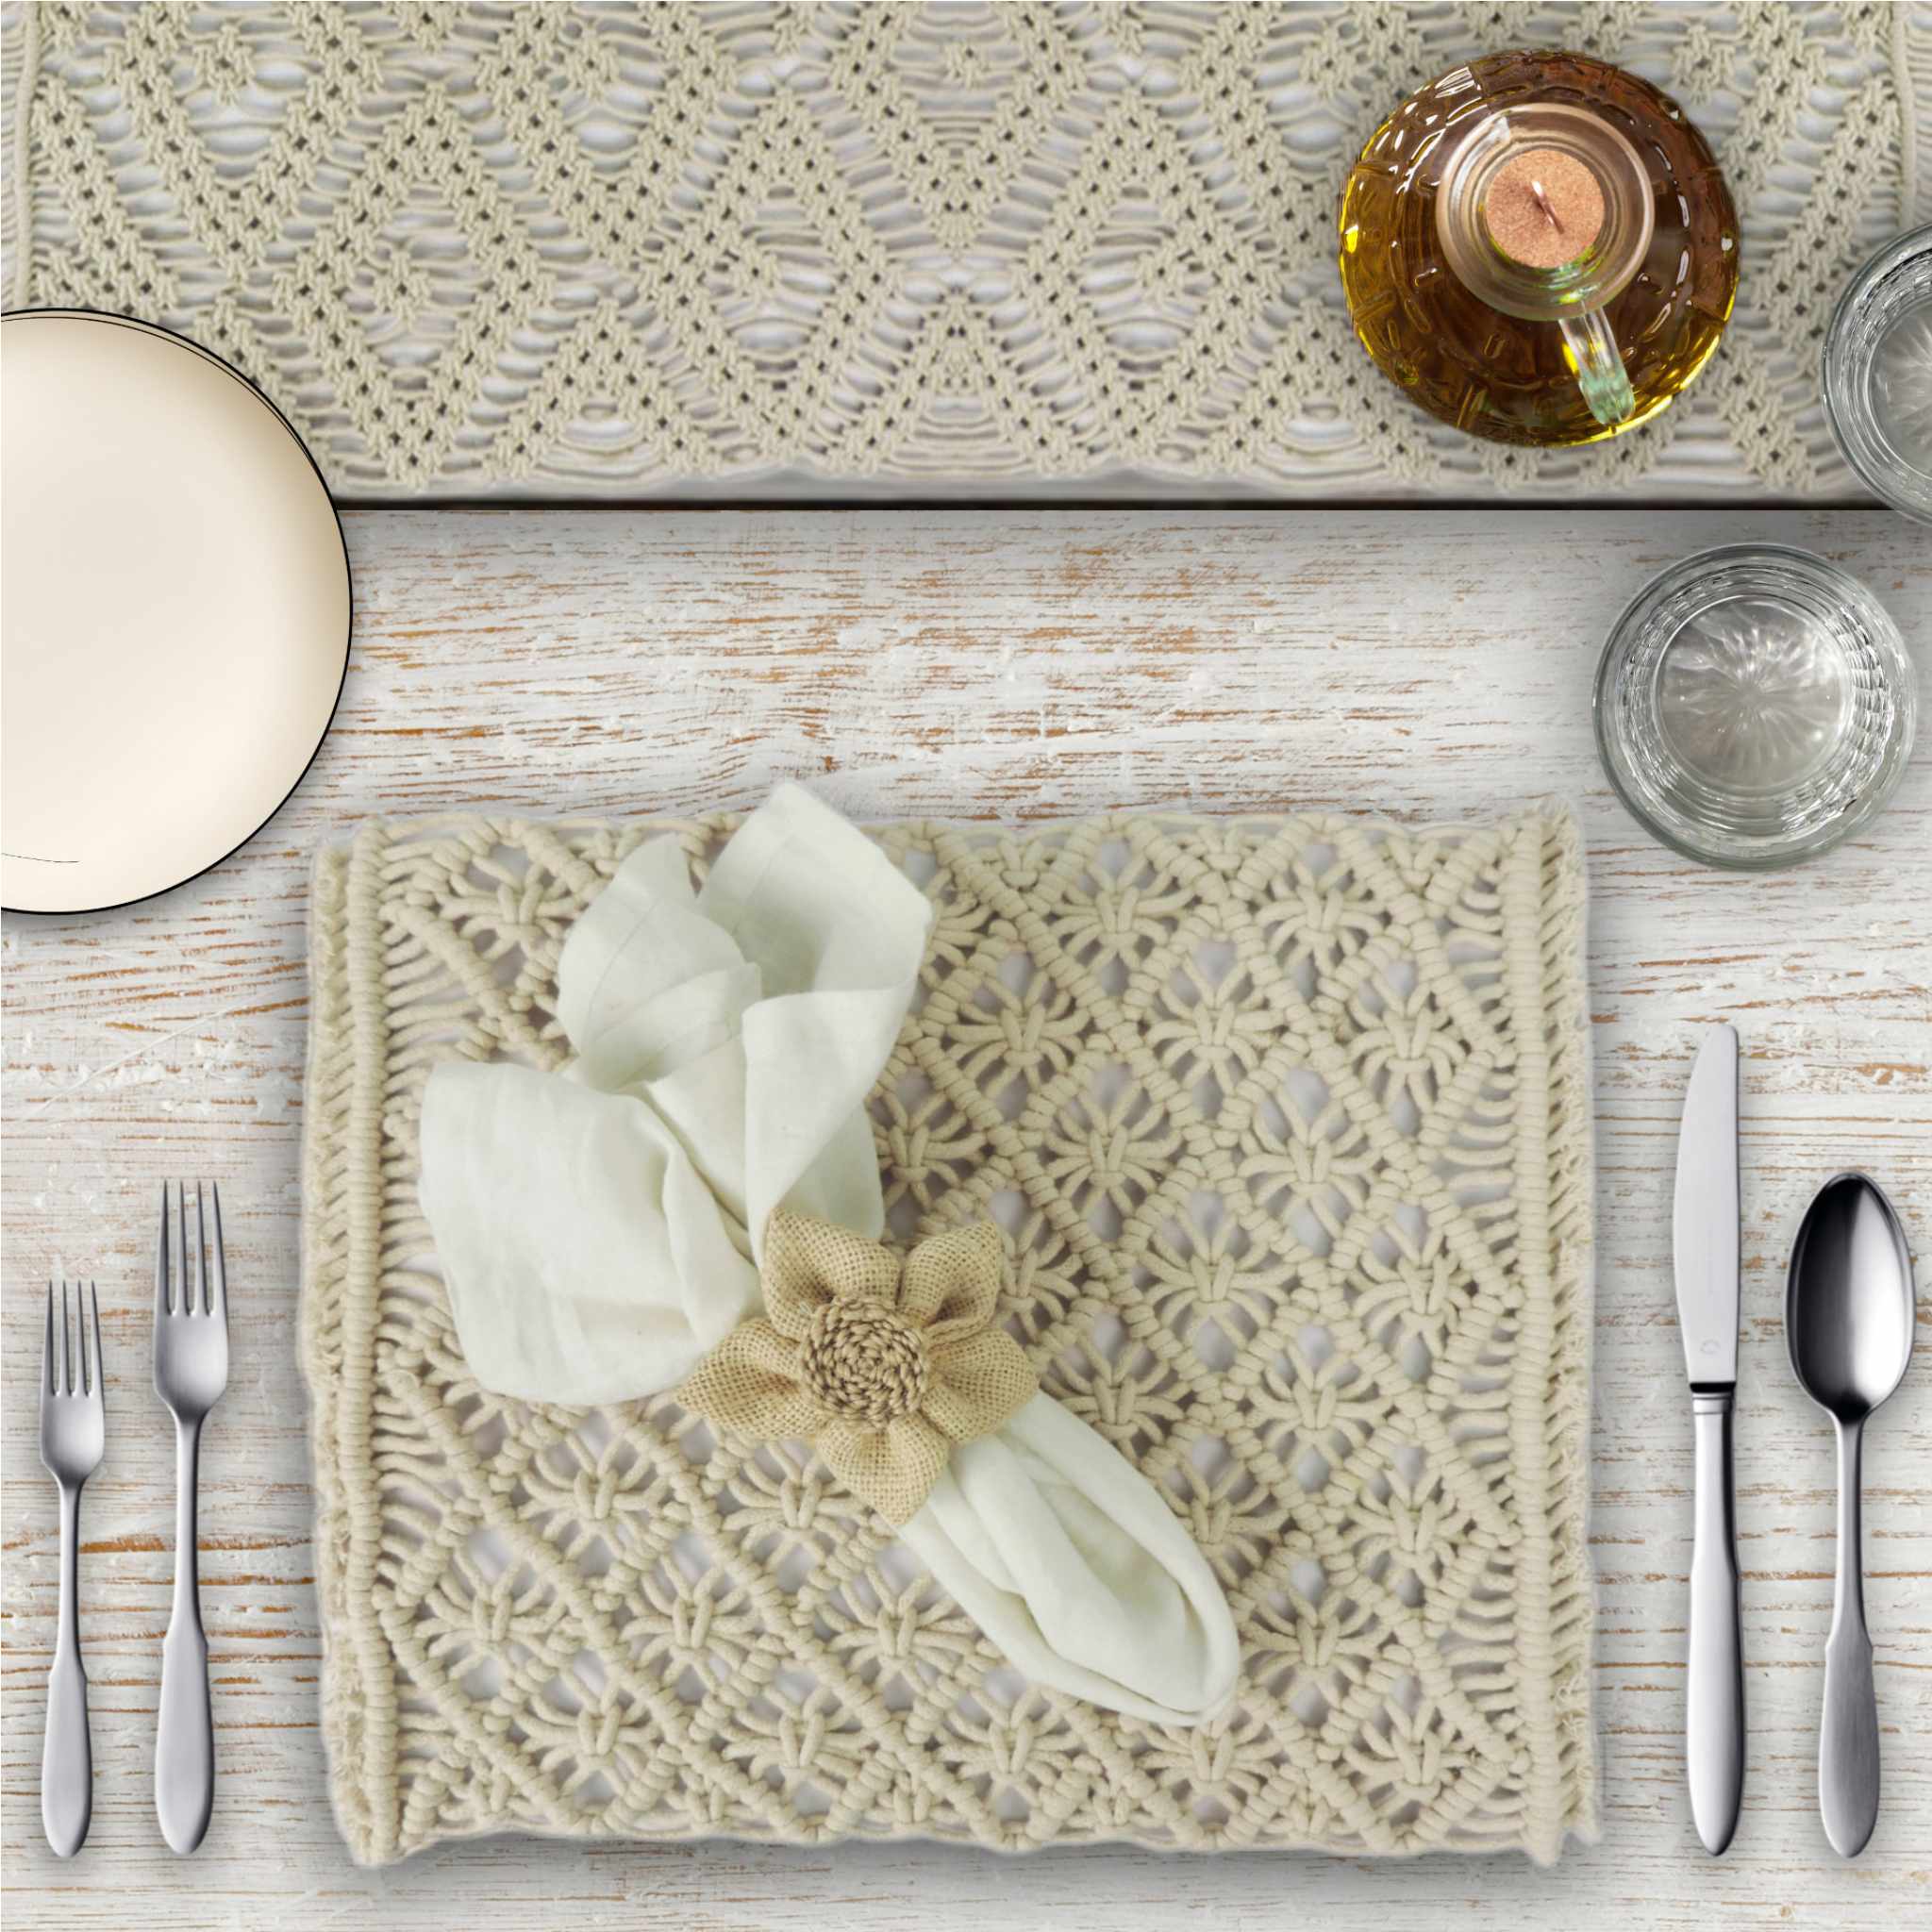 Macramé Placemat in White, Set of 2/4